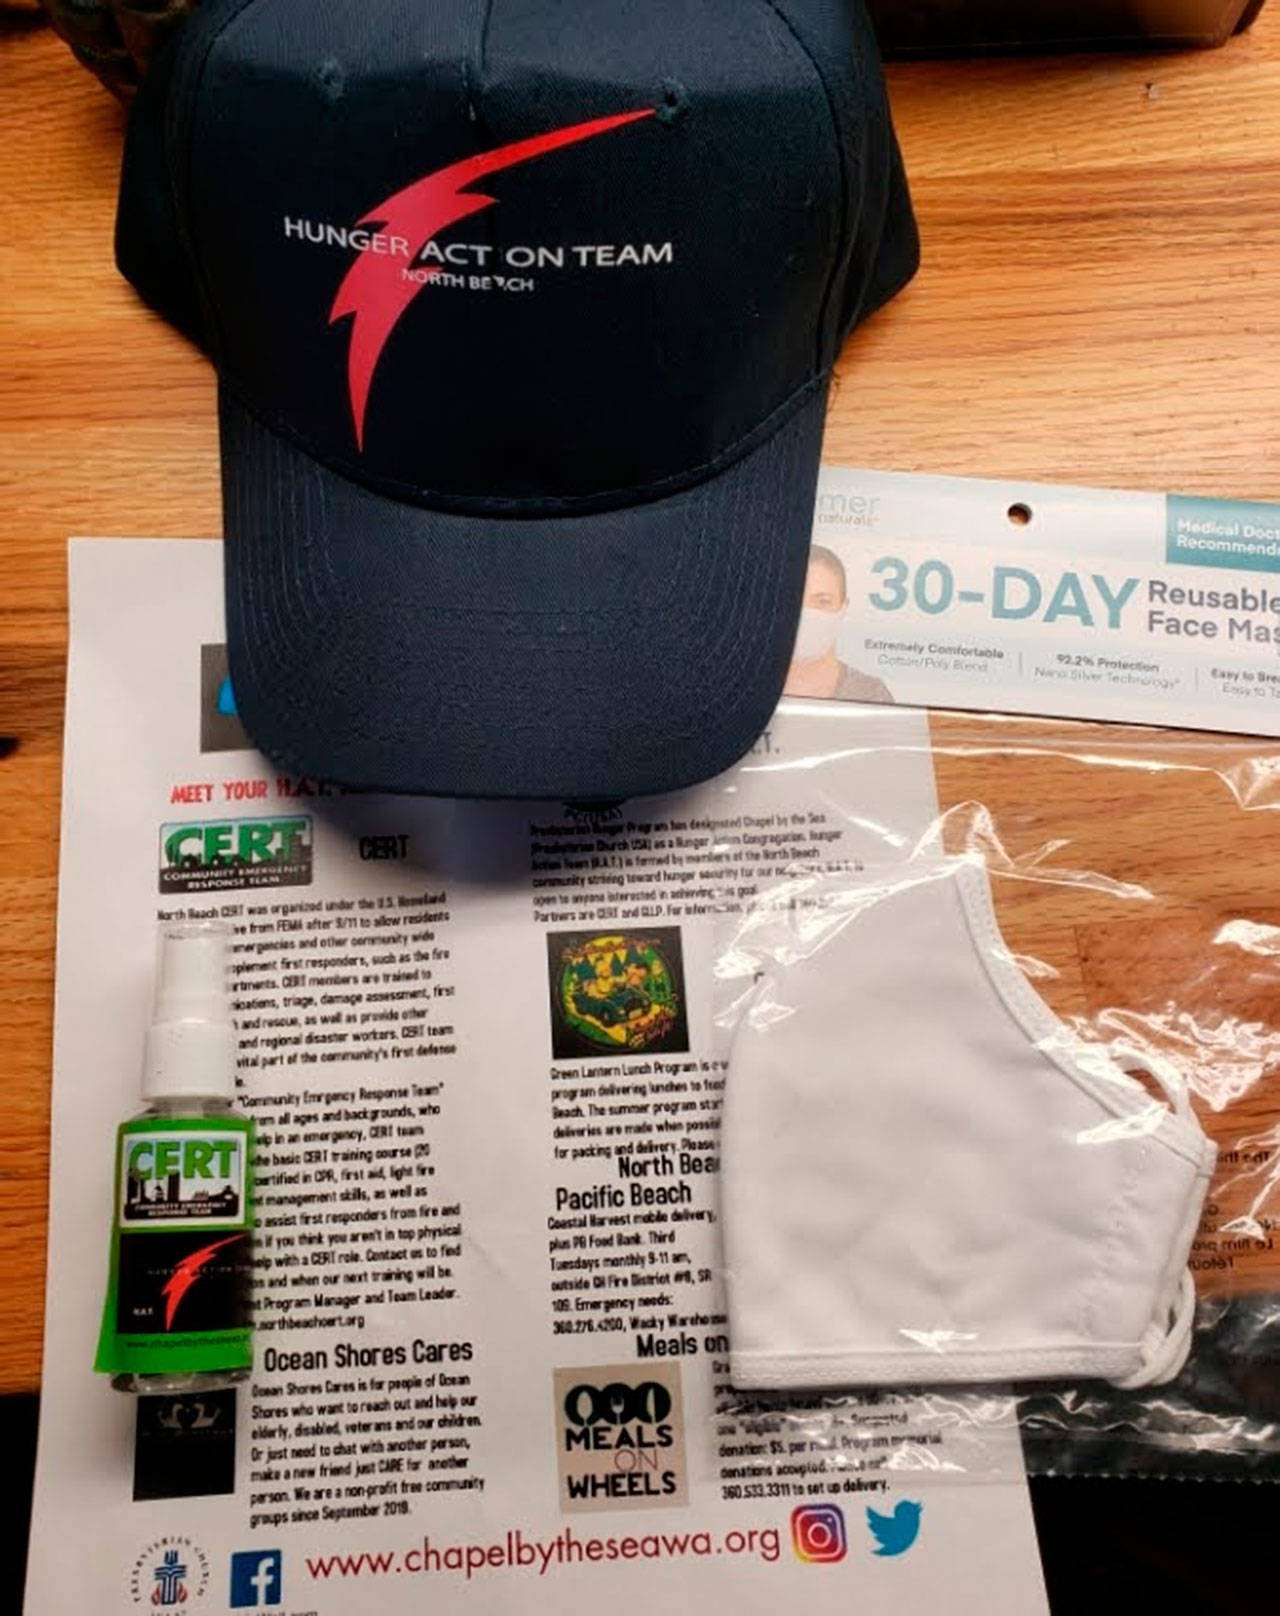 Safety kits include face masks, hand sanitizer and information sheet with emergency and food resources. (Courtesy photo)